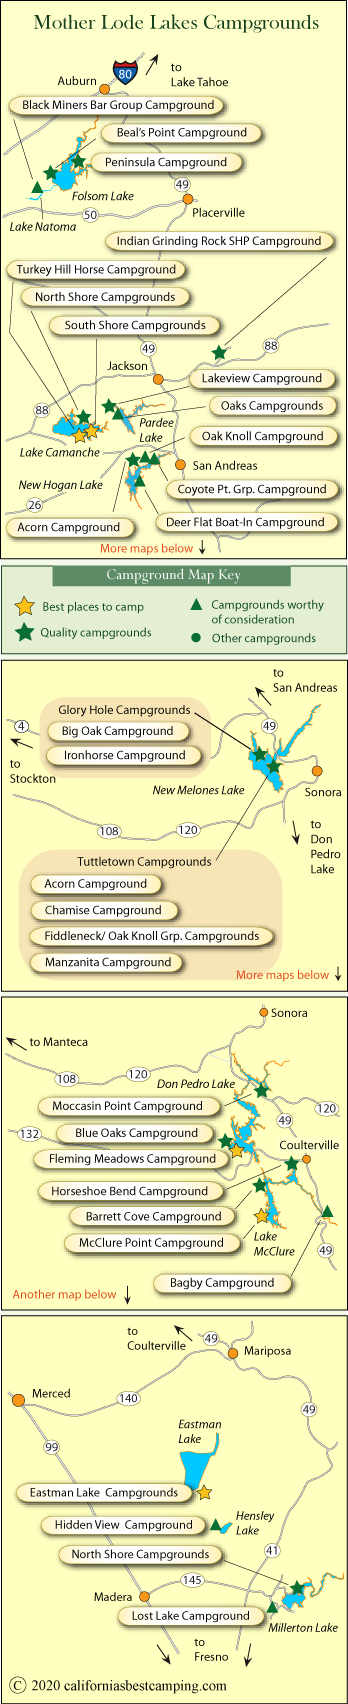 map of campgrounds in around the foothill lakes of the Mother Lode